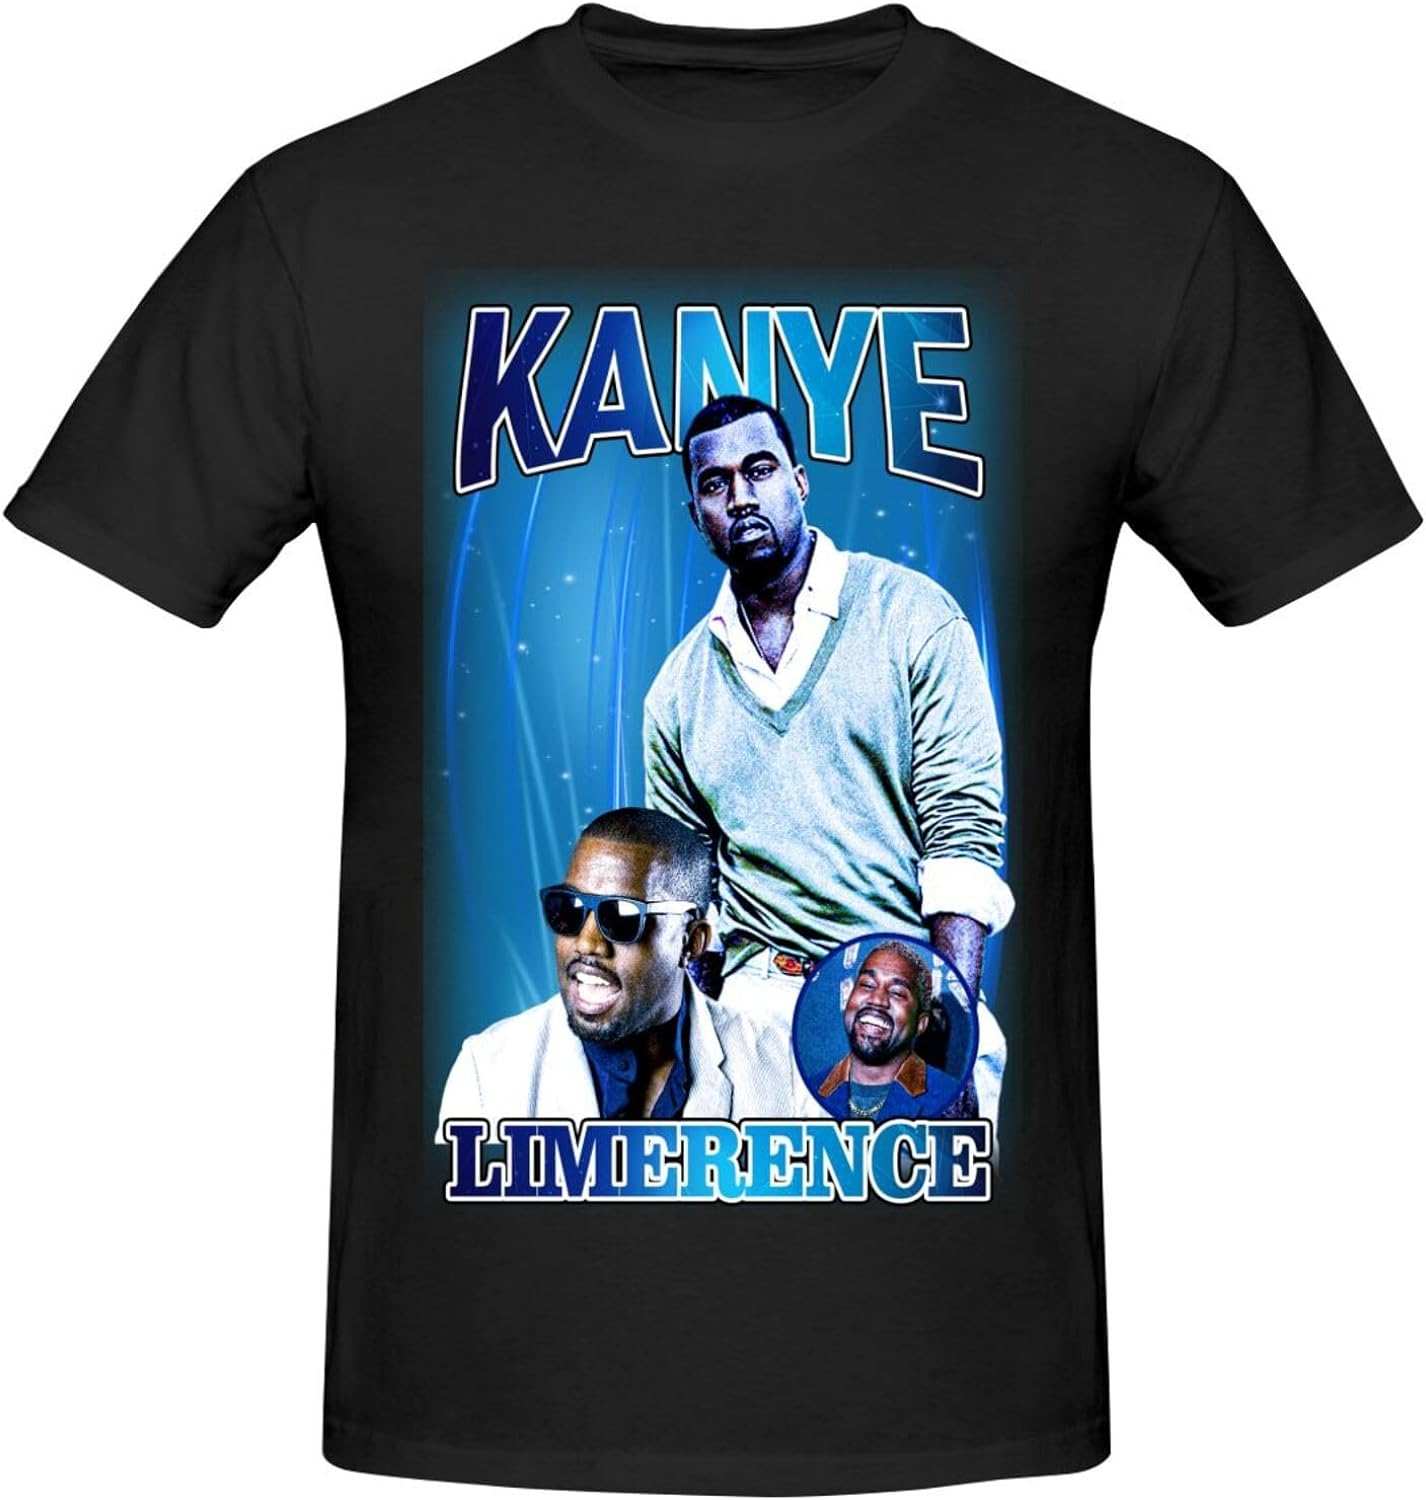 Kanye West Shirt, Cool and Trendy Shirt